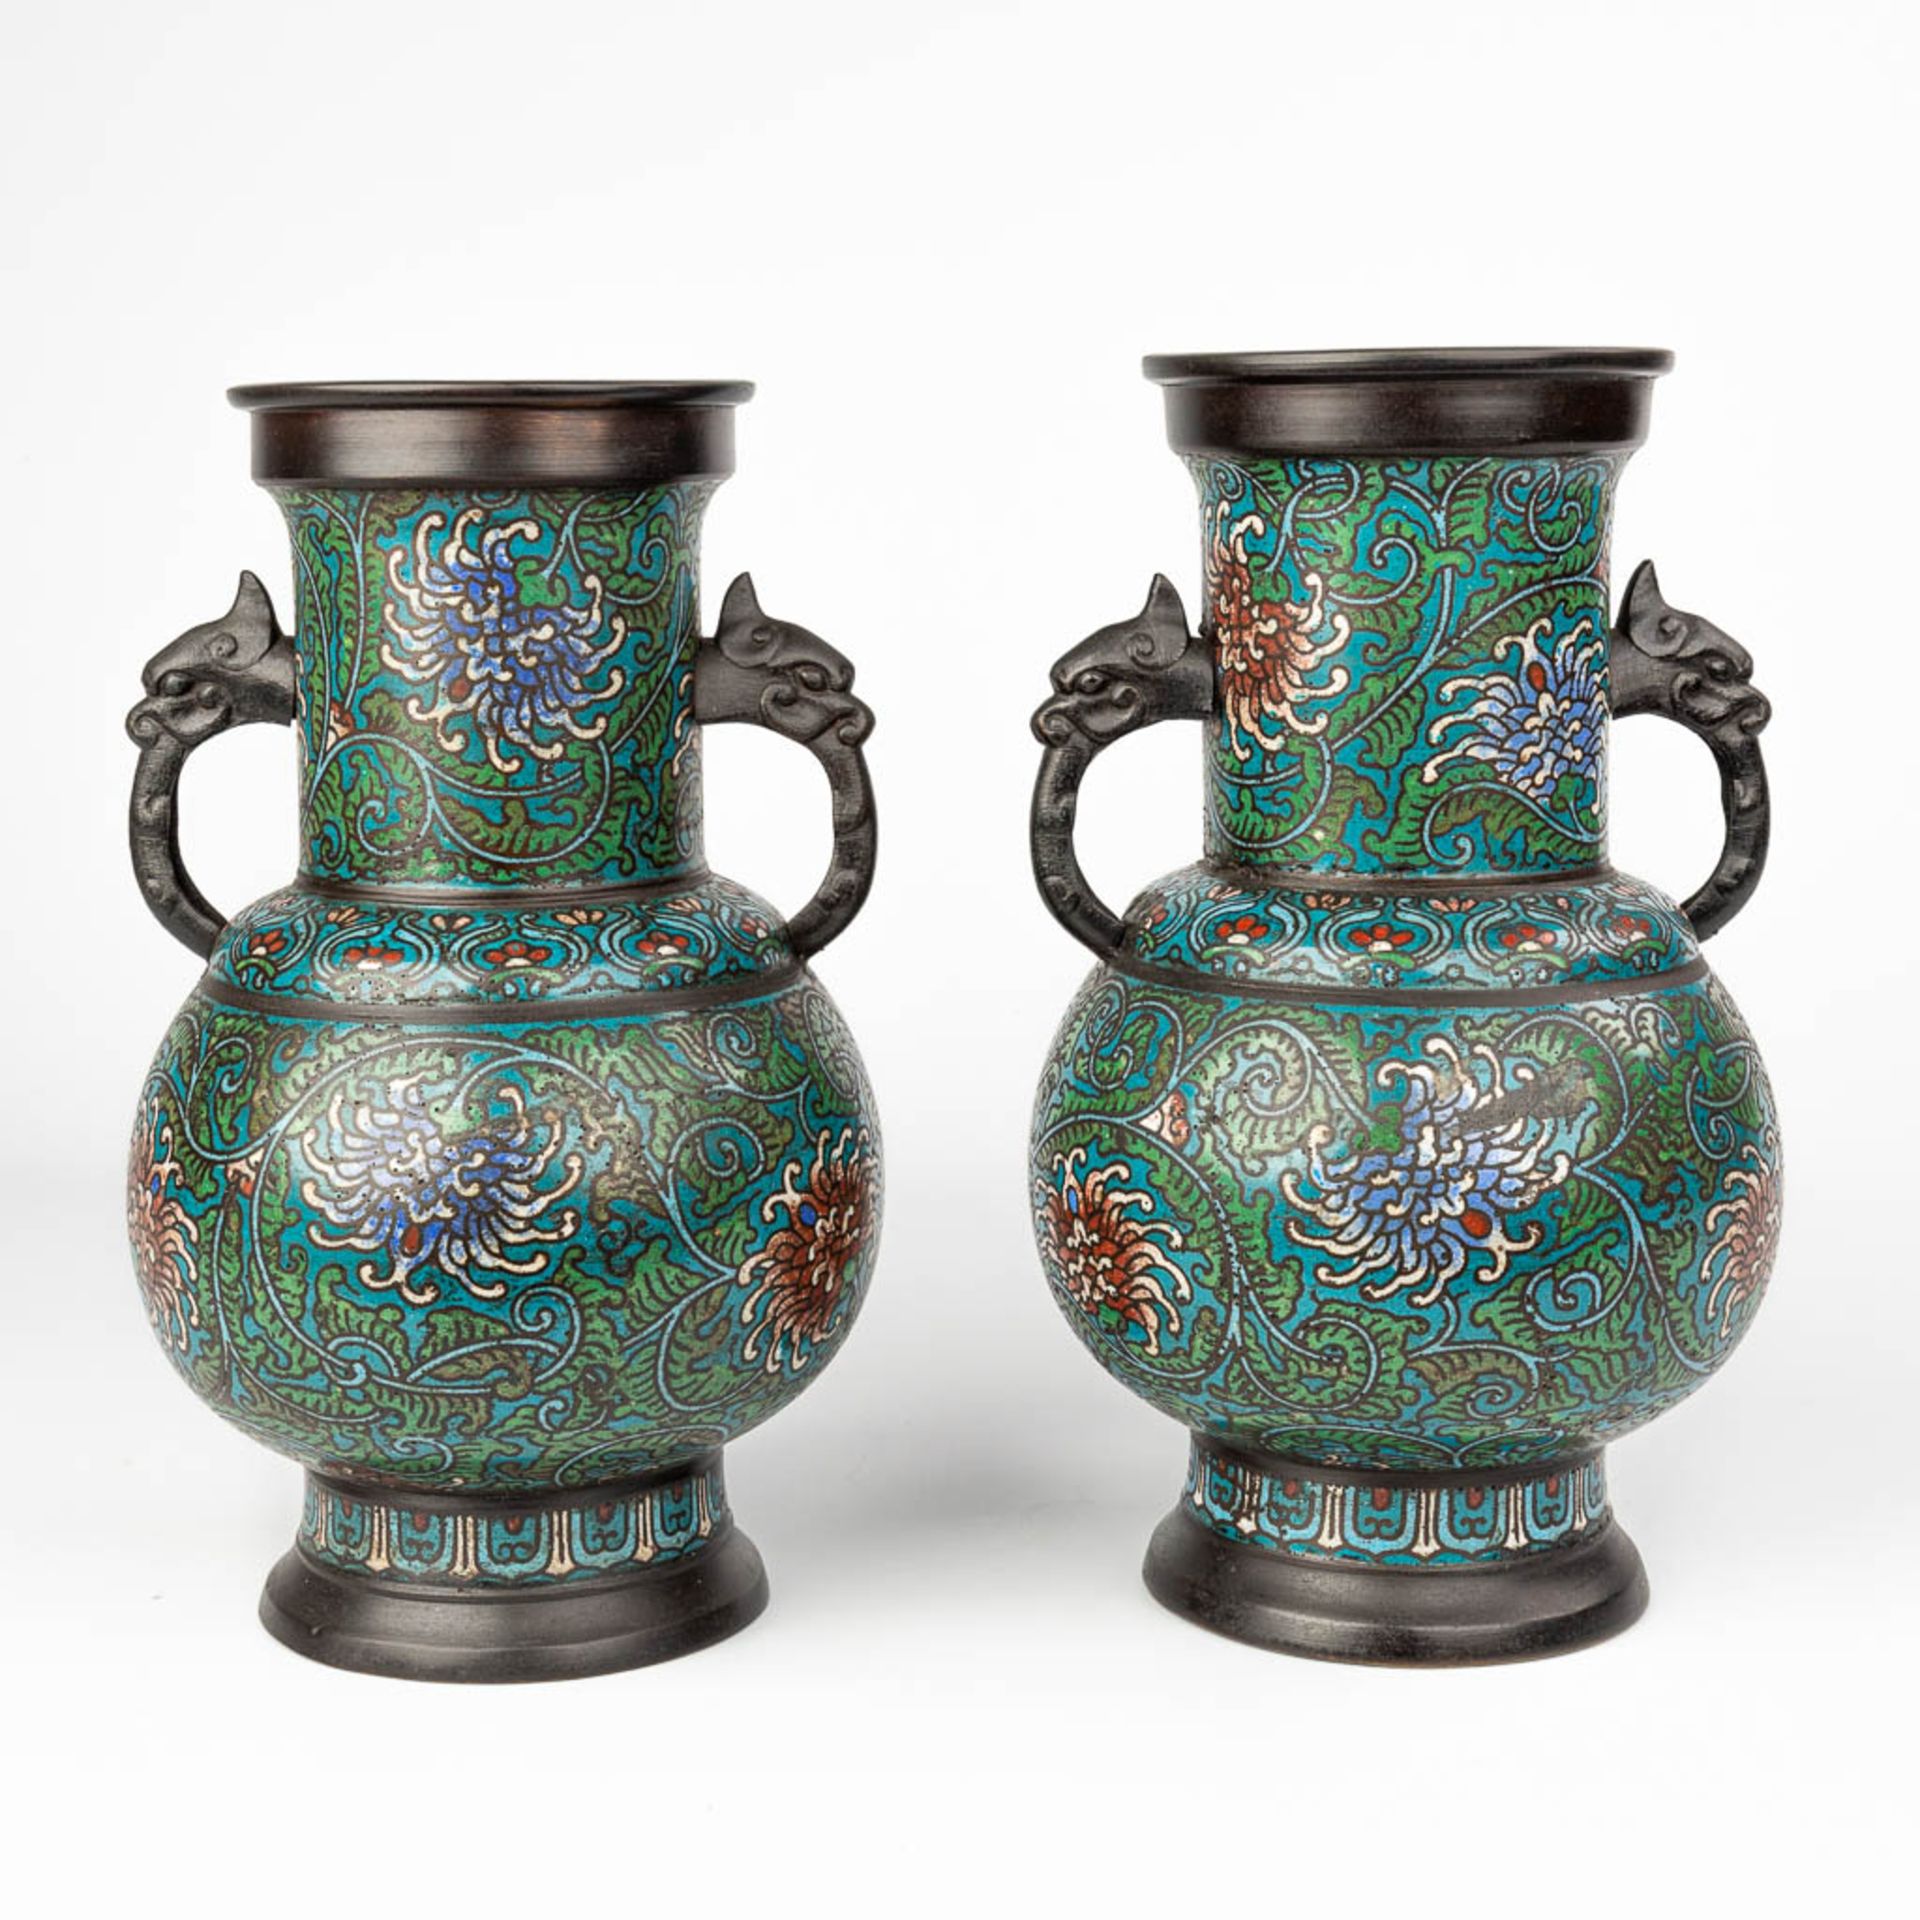 A pair of antique cloisonnŽ vases, made in Japan. Probably Meiji